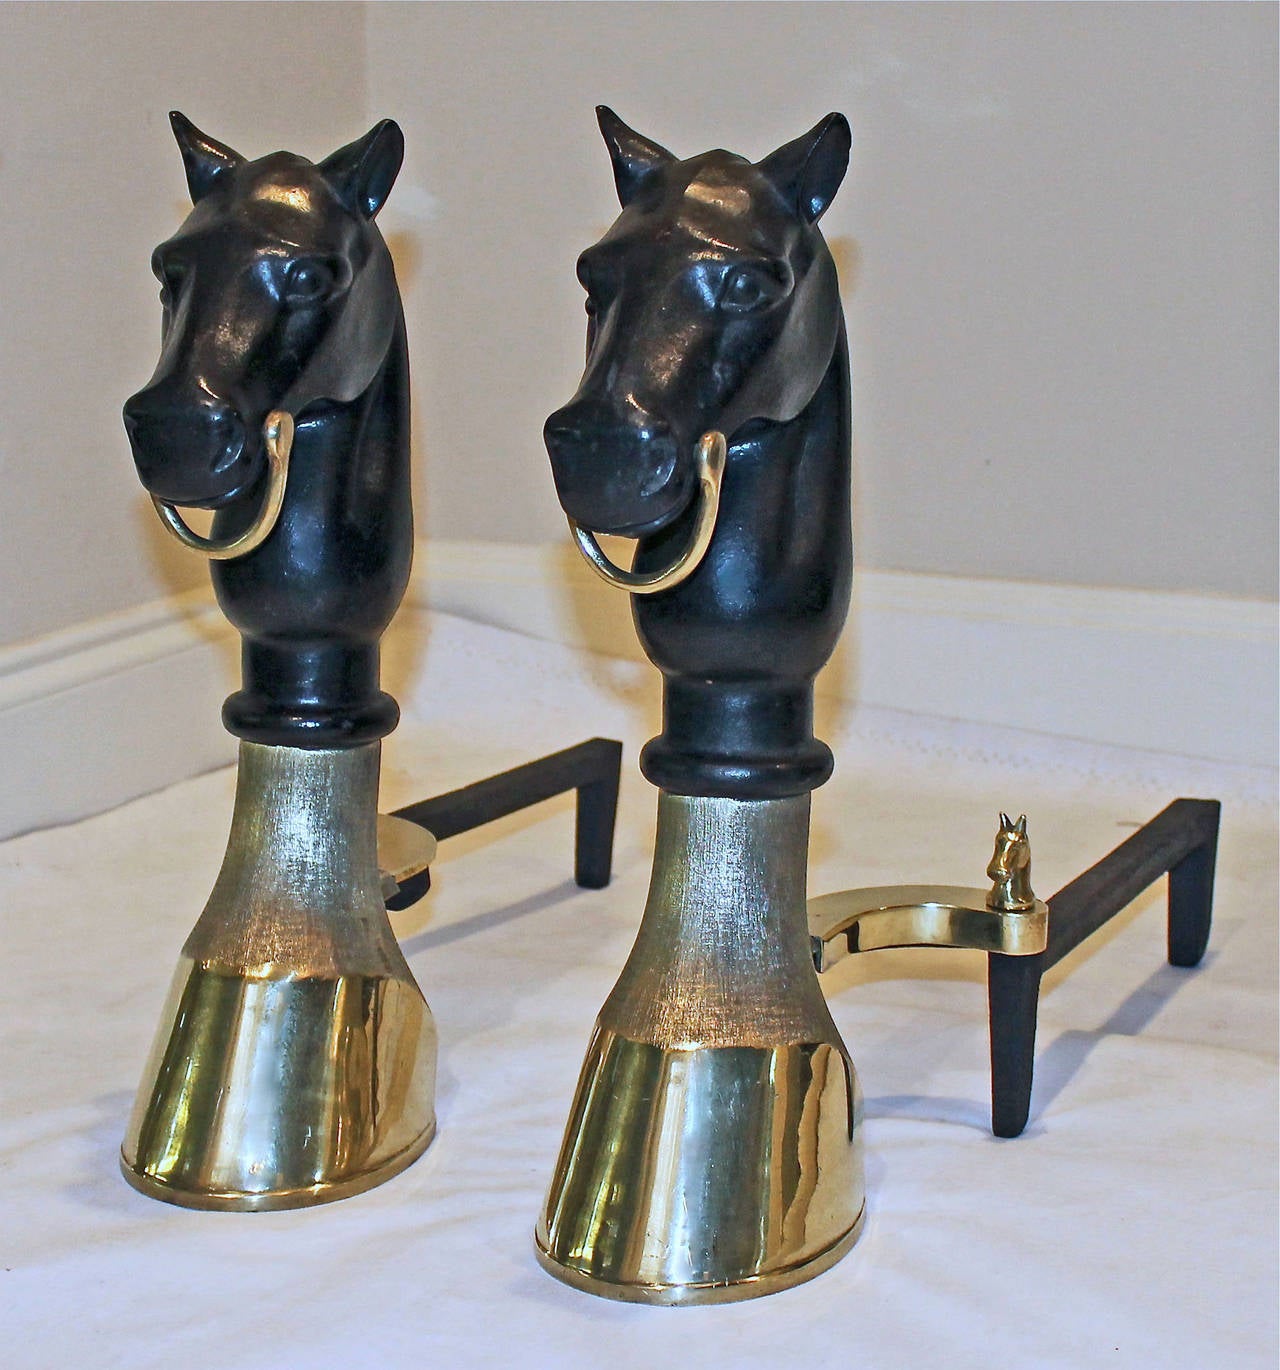 A very handsome pair of bronze or brass and cast iron andirons with a horse head and hoof motif and horse head finials at the base.